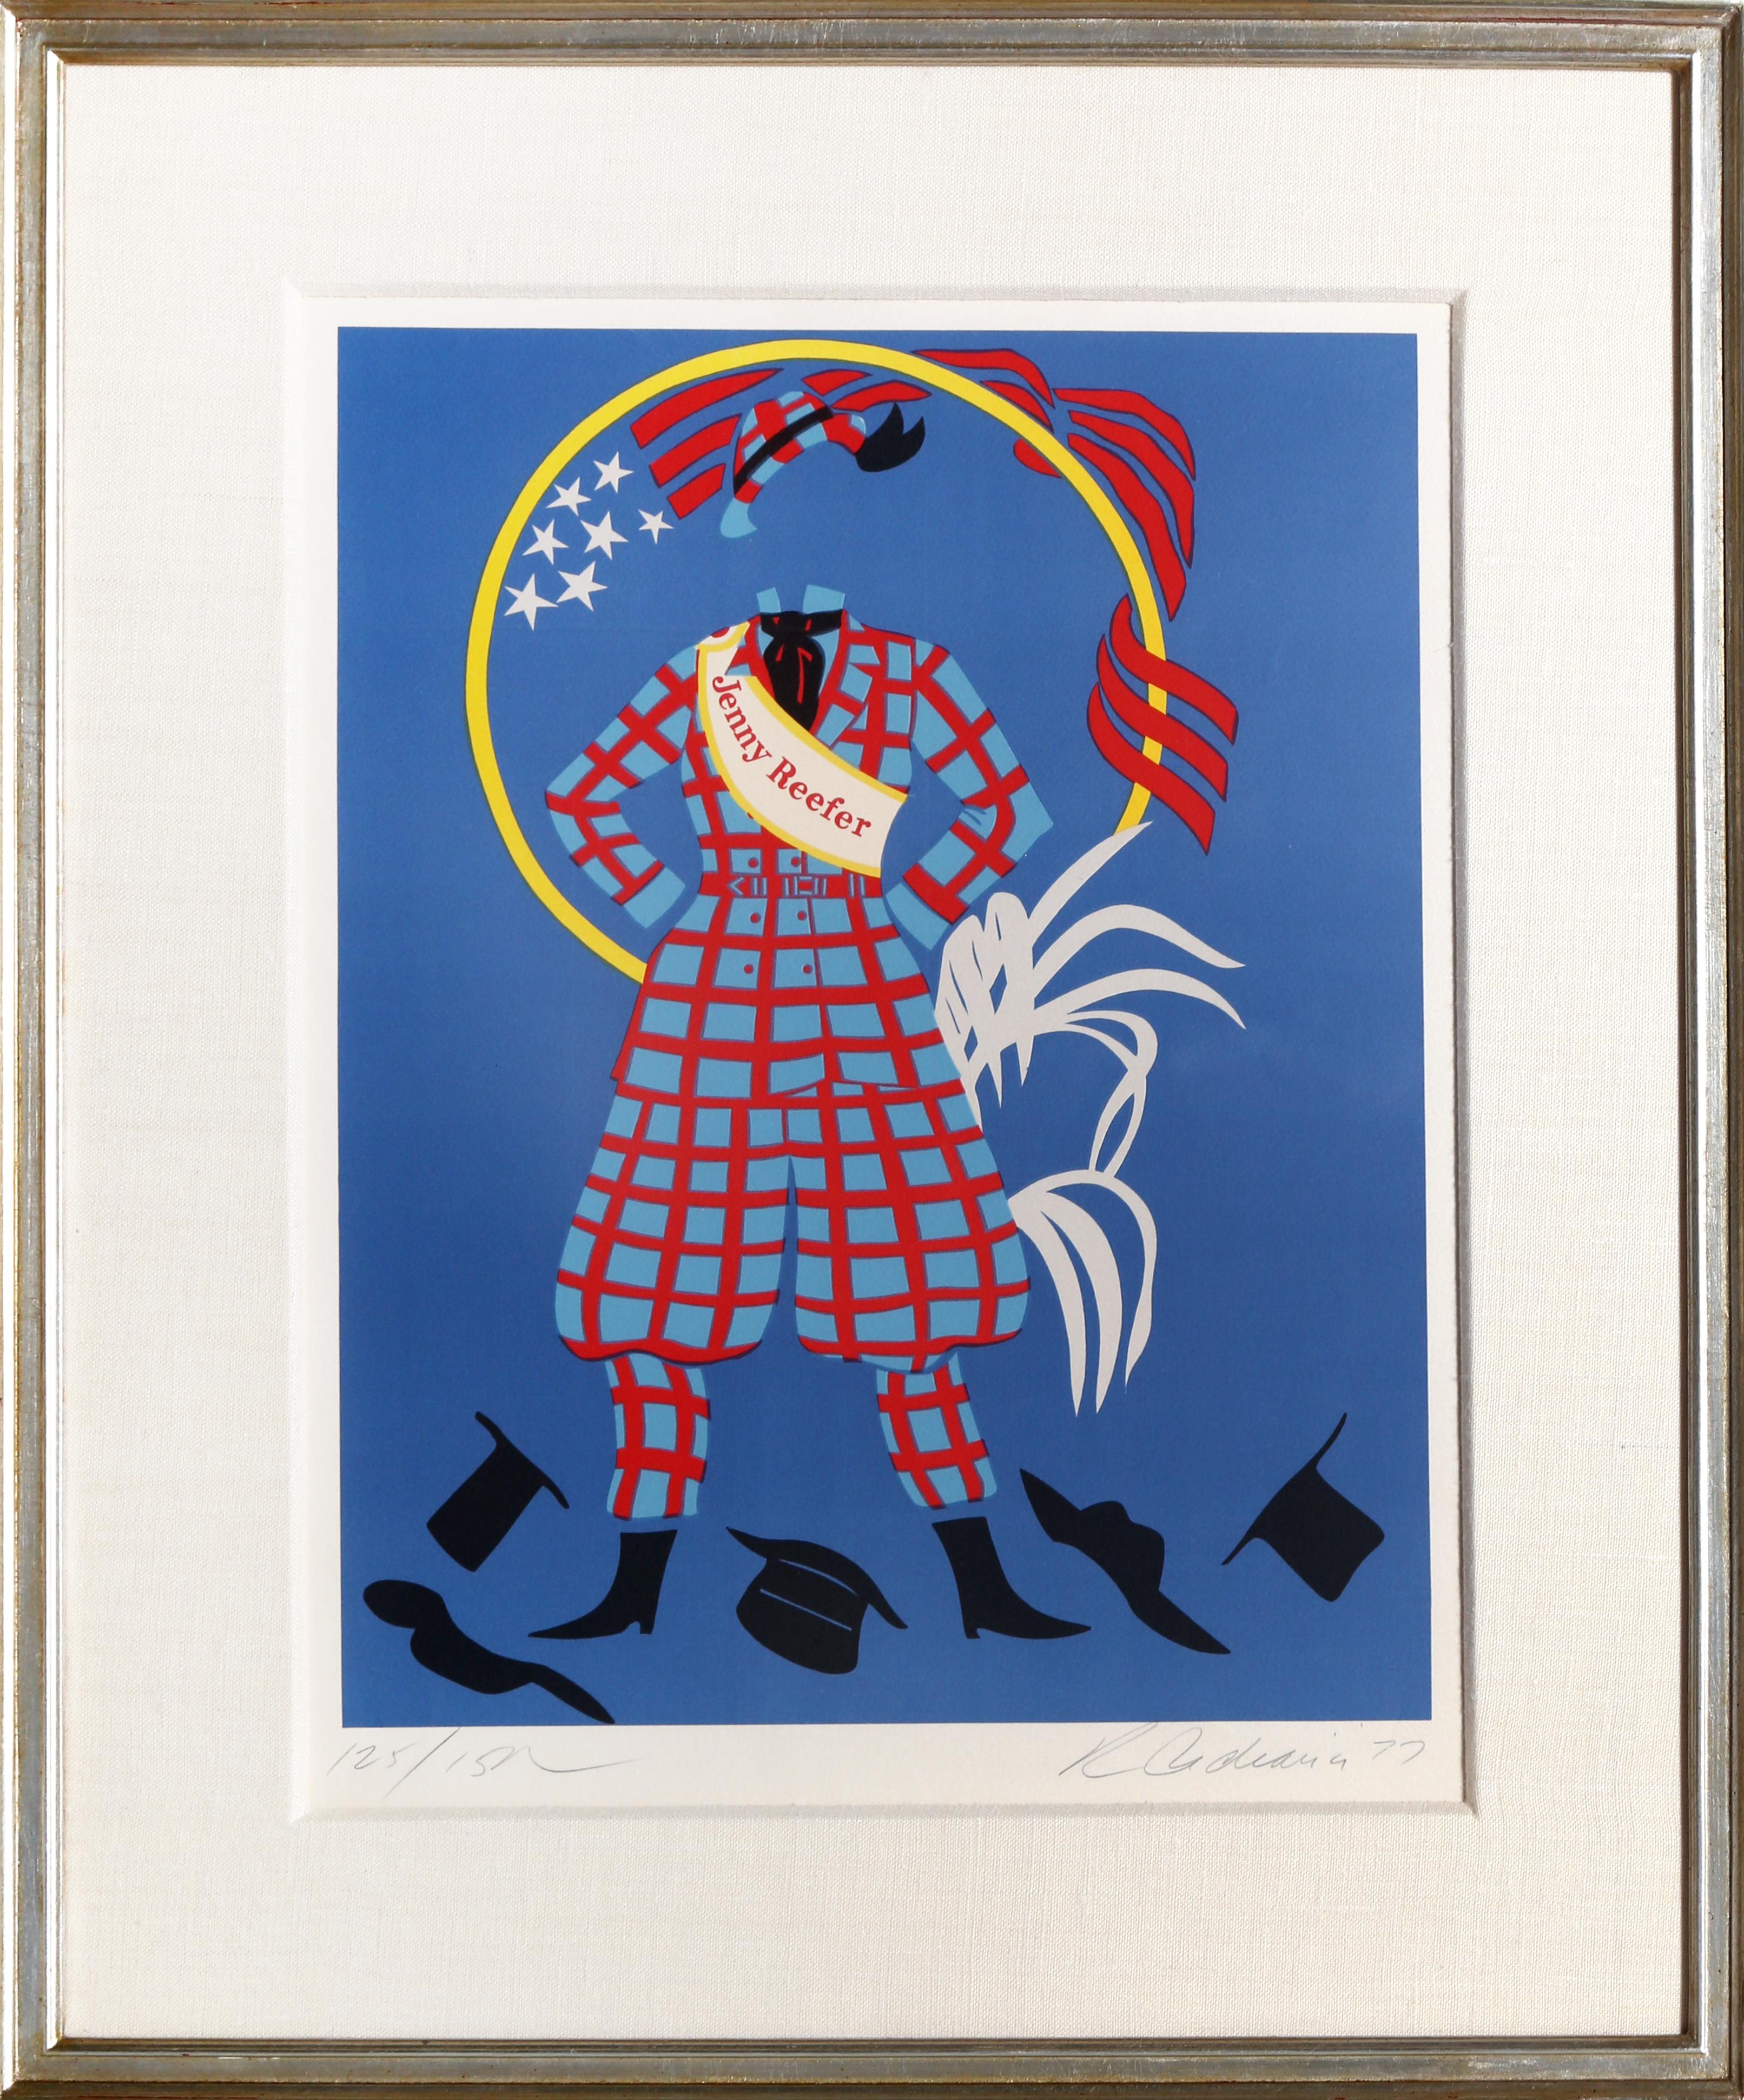 Artist: Robert Indiana, American (1928 - 2018)
Title: Jenny Reefer from Mother of Us All Series
Year: 1977
Medium: Lithograph on Arches, signed and numbered in pencil 
Edition: 125/150 
Paper Size: 24 x 20 inches 
Frame Size: 27 x 23